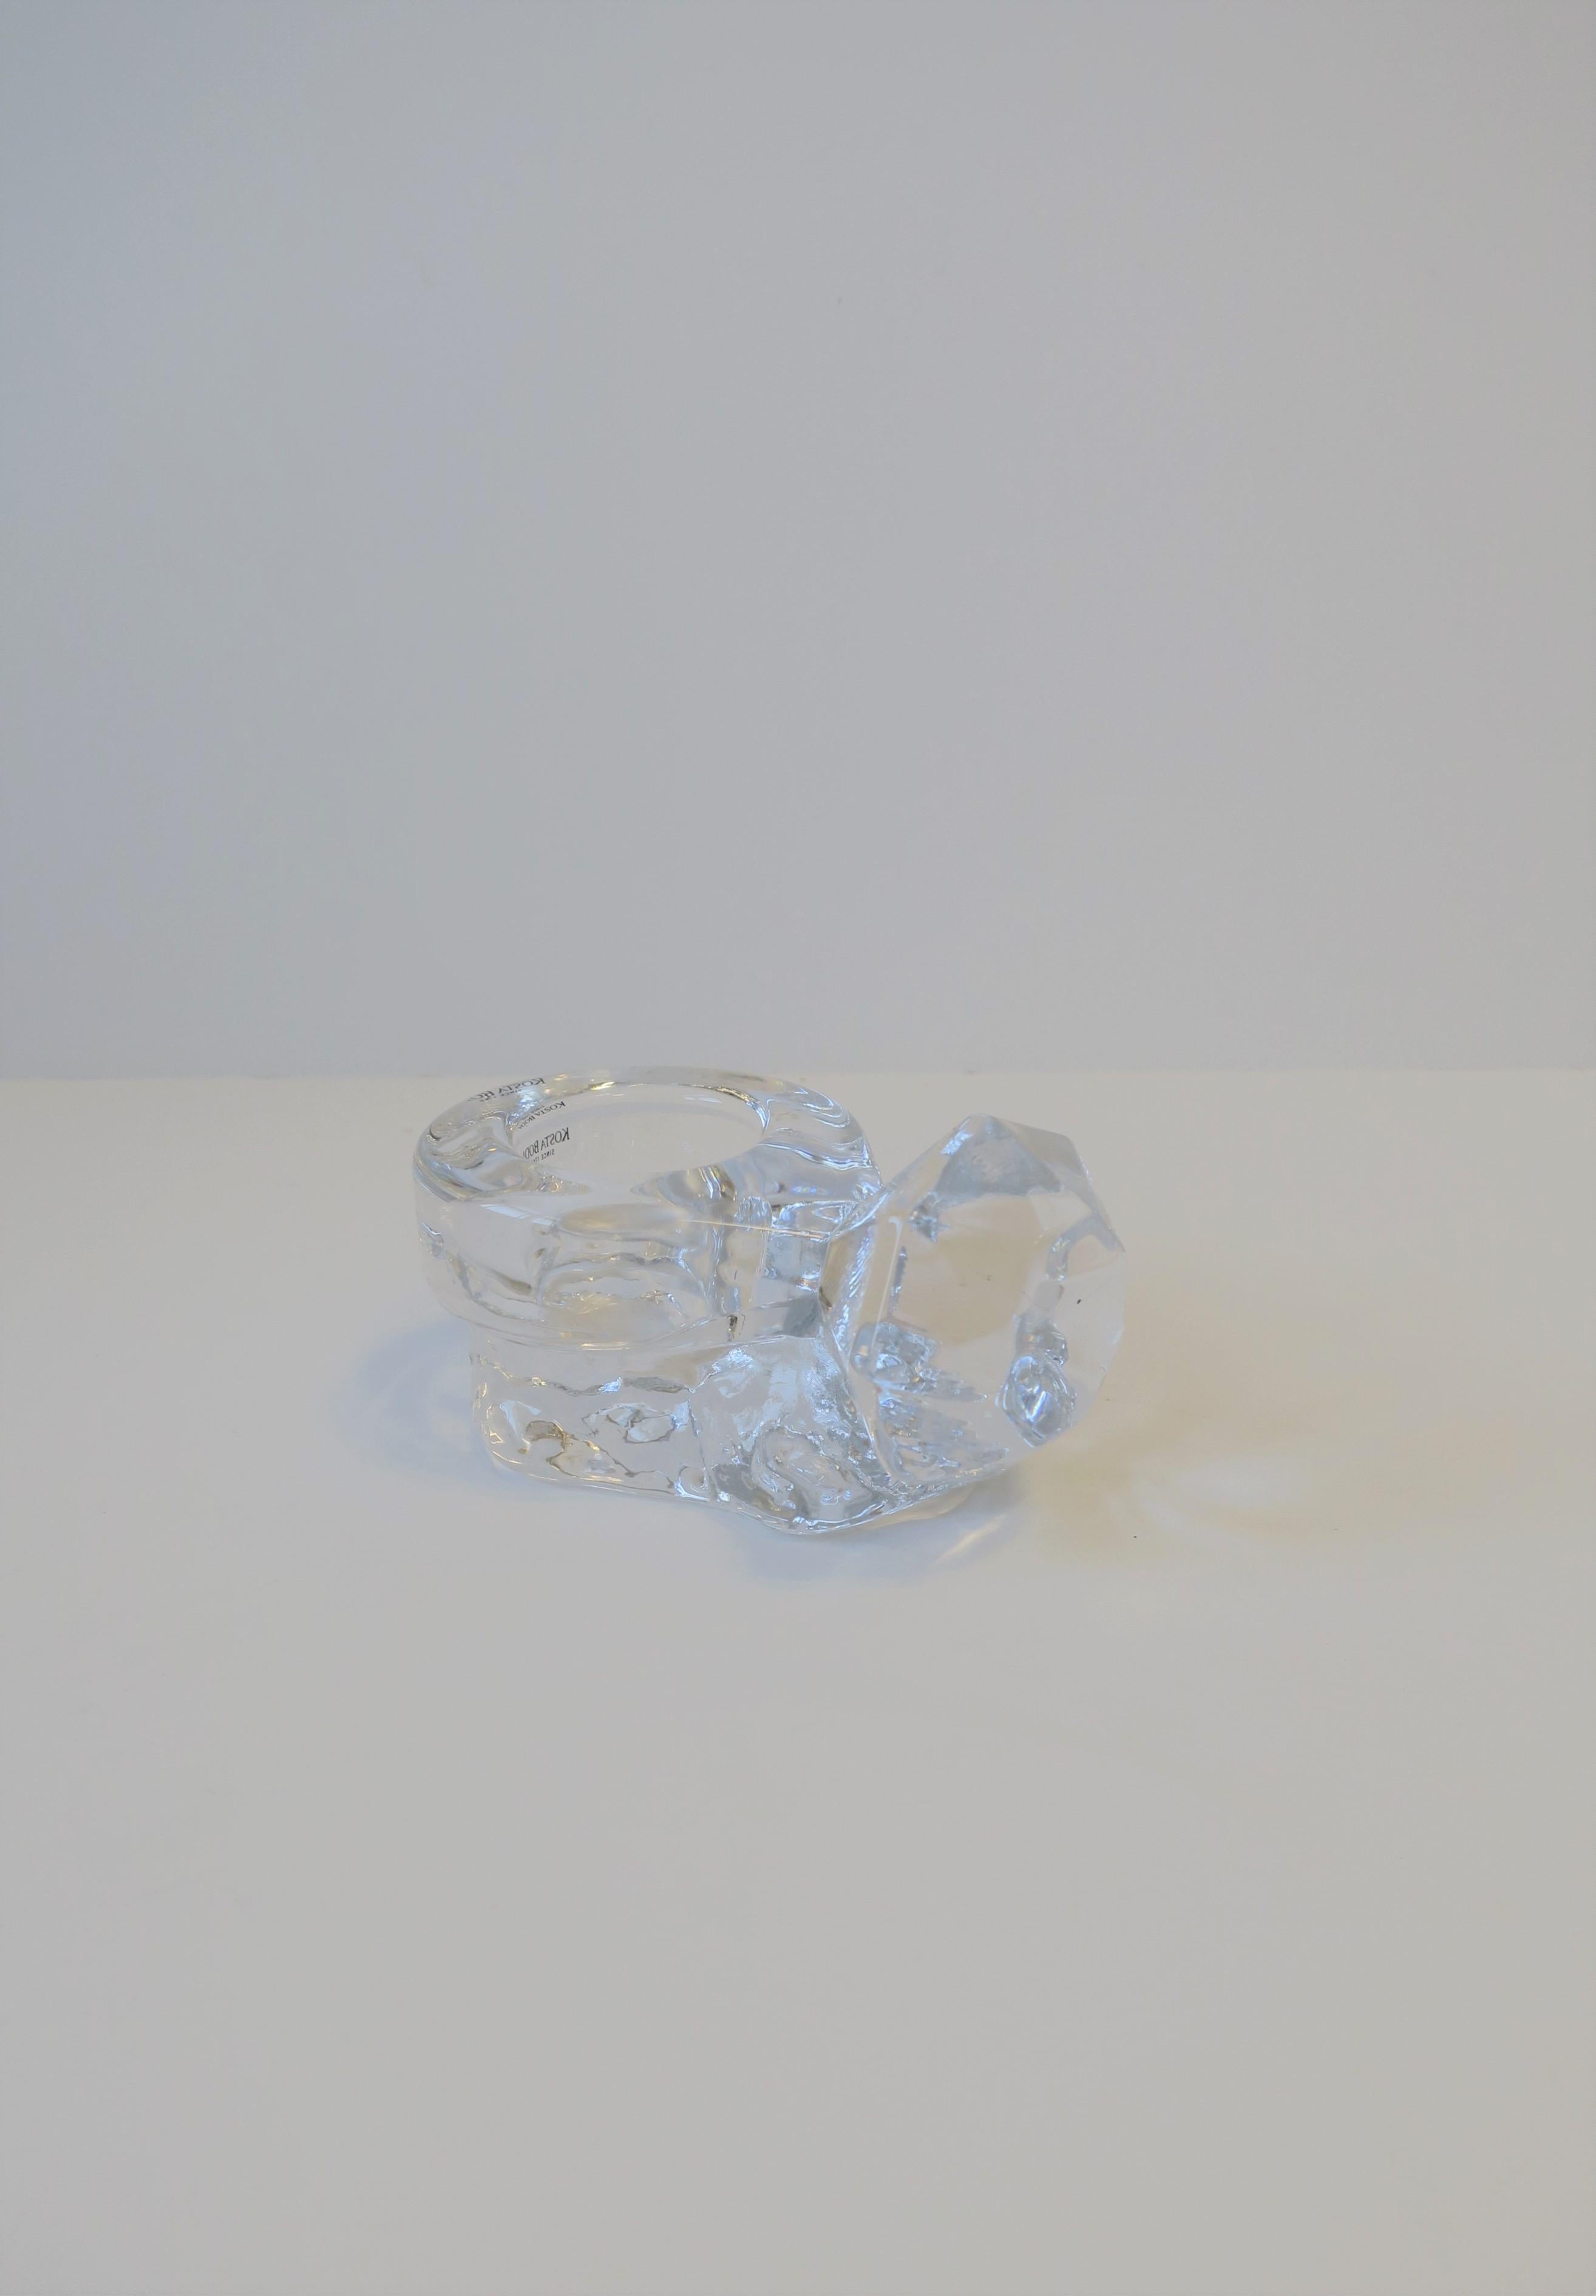 A beautiful and fun 'Diamond' solitaire ring crystal jewelry dish by Swedish maker Kosta Boda, Sweden. Jewelry dish, designed in the shape of a diamond solitaire ring, is well made and substantial. Piece could work well on a vanity, nightstand,